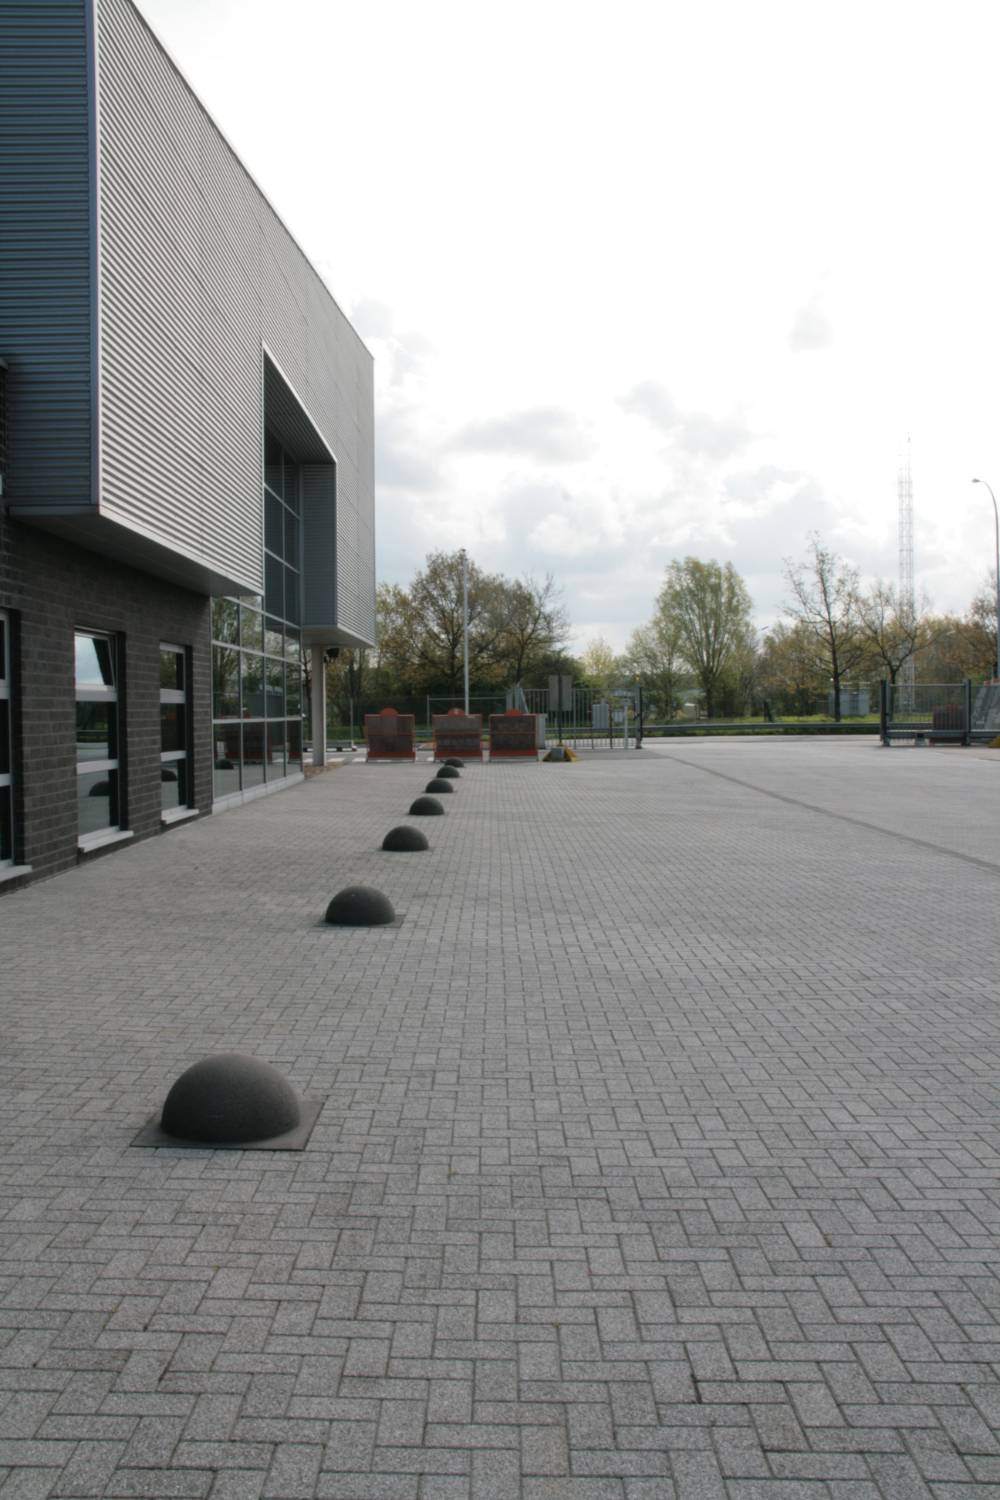 Verge Protection Paving